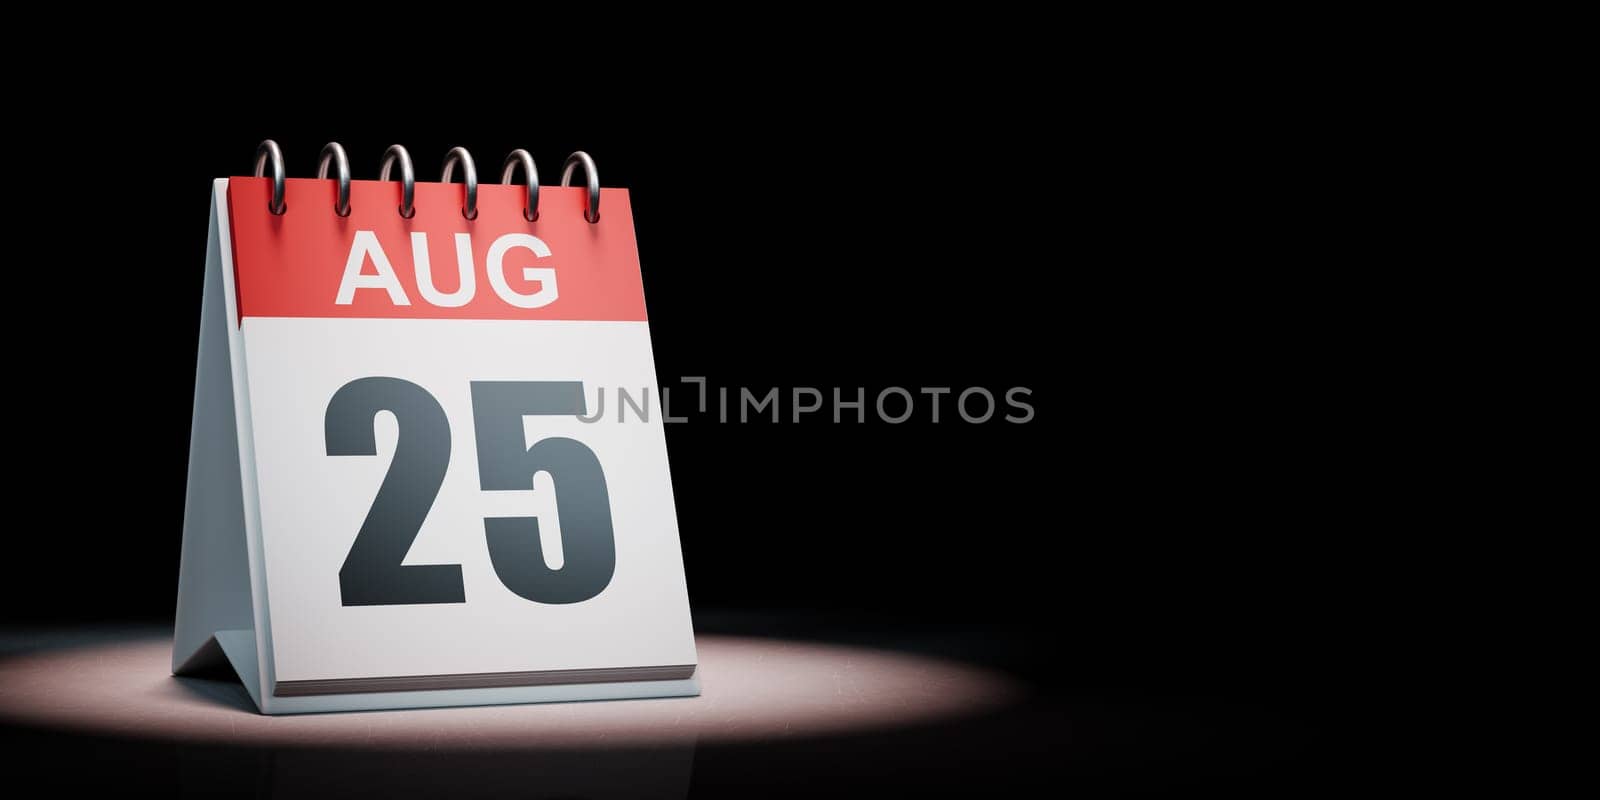 Red and White August 25 Desk Calendar Spotlighted on Black Background with Copy Space 3D Illustration